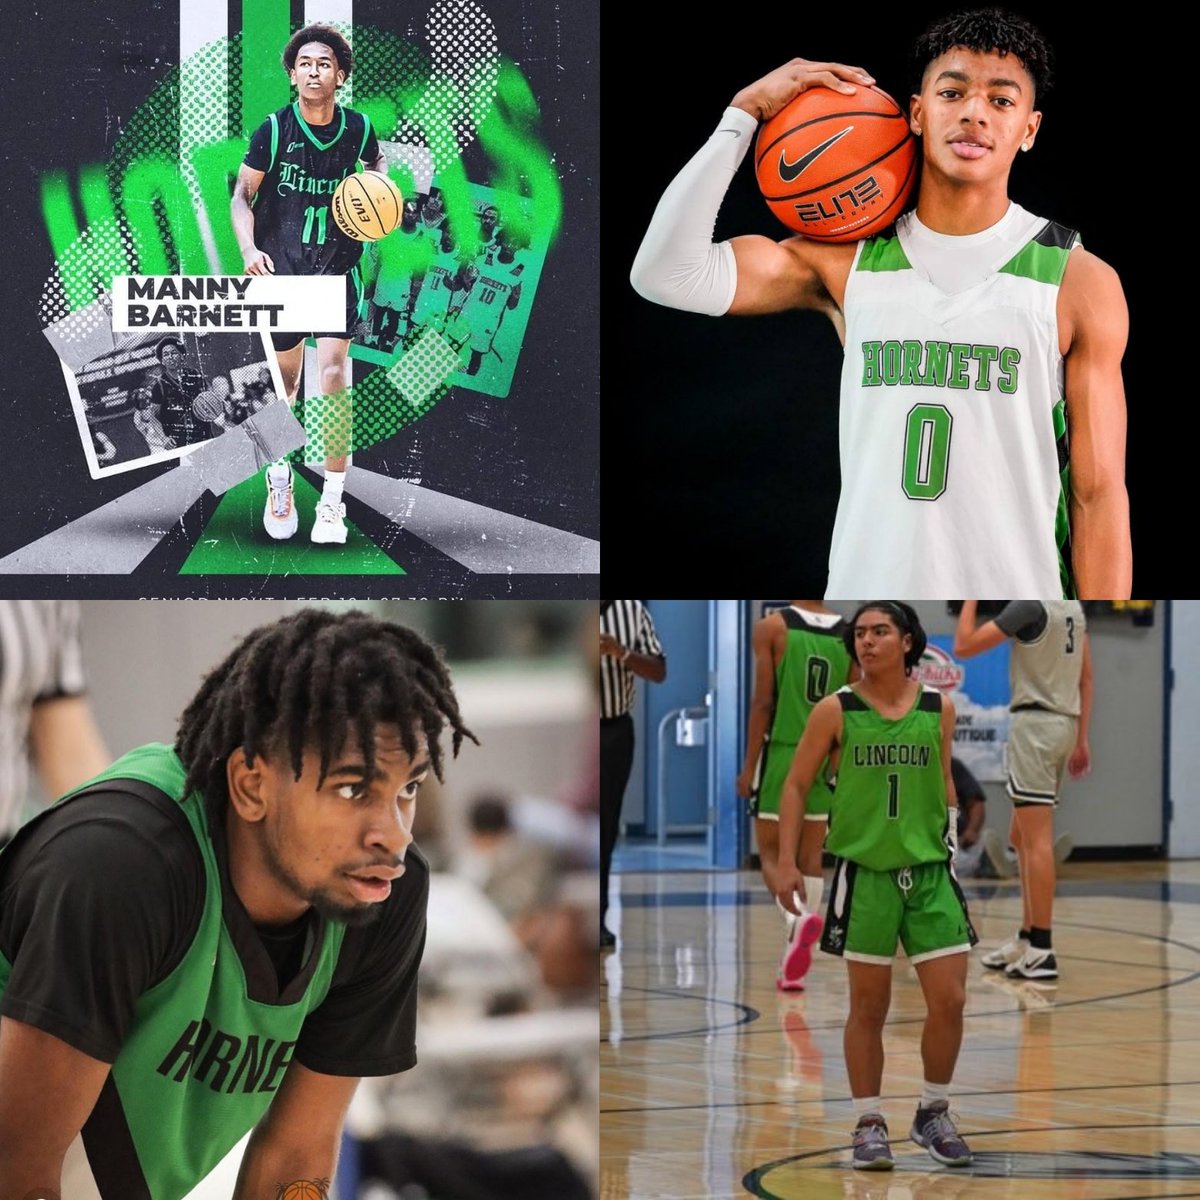 Want to say congratulations to these four Hornets for making All League. @kyeliin was selected player of the year in league, @MannyBarnett was selected to first team, and @_d3rrion_ and @s3basti4nFlores was selected to second team. Job is still not done. Still work to do.